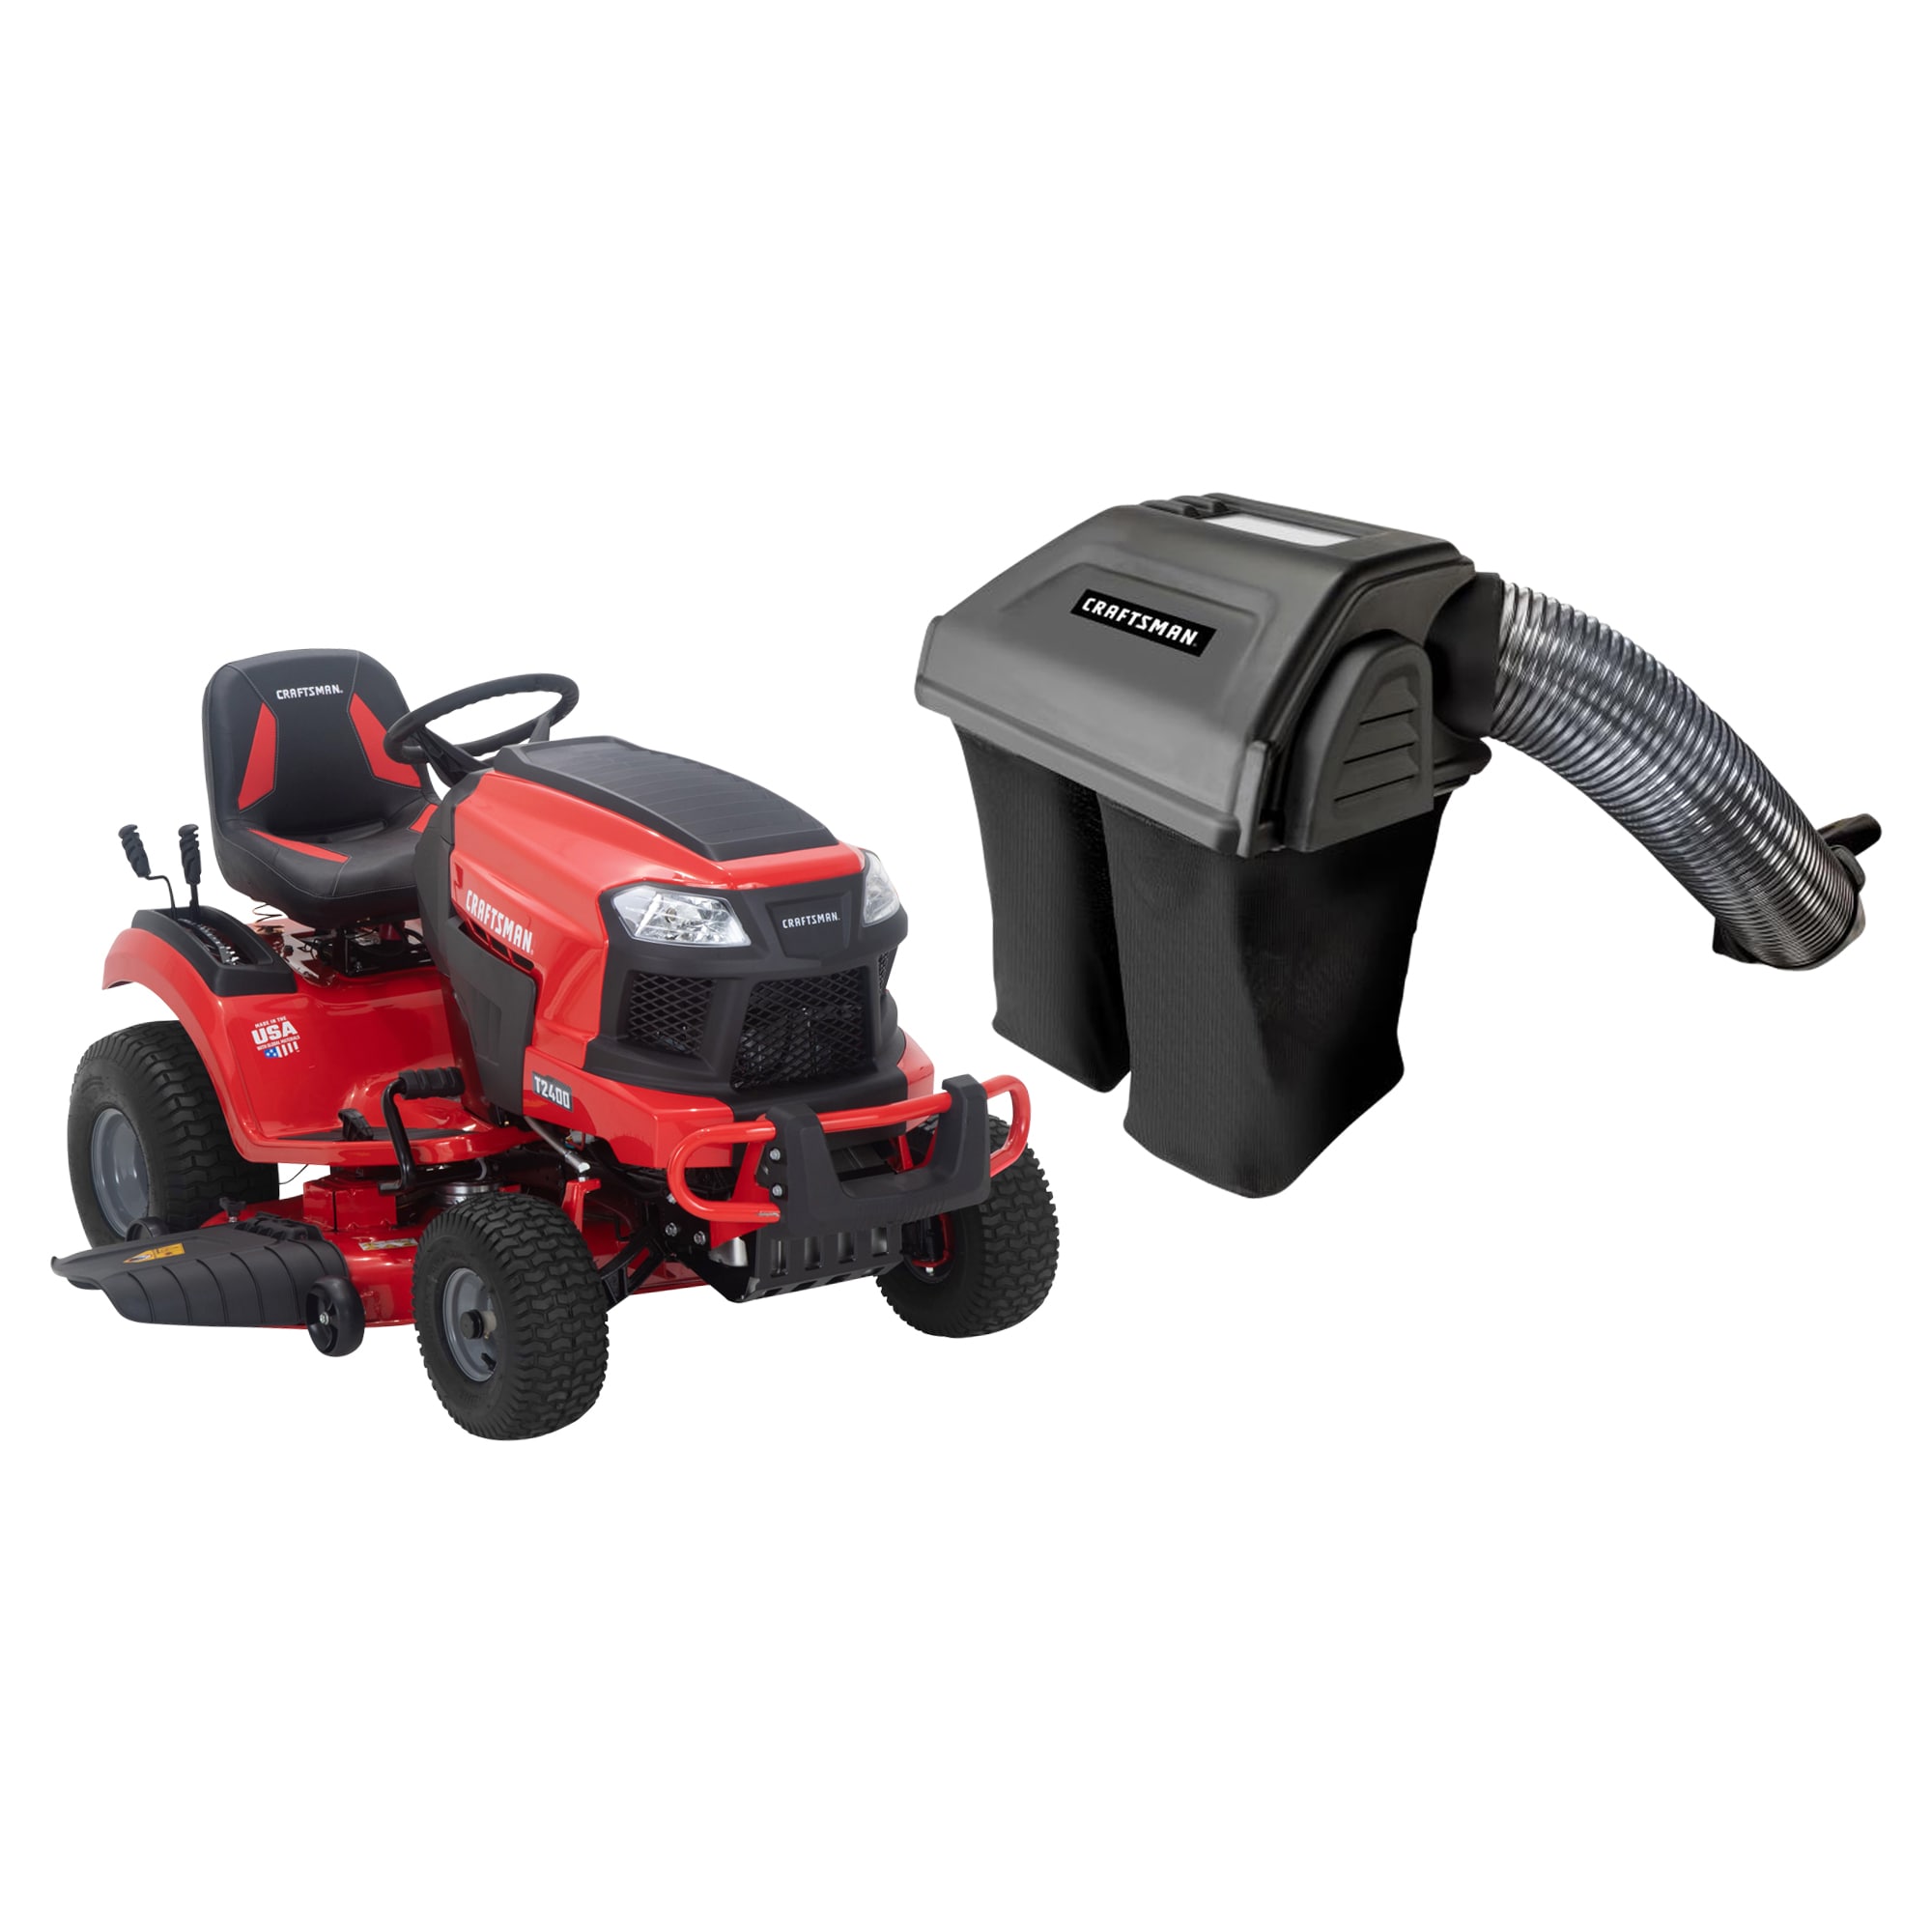 Craftsman Riding Lawn Mower With Bagger | peacecommission.kdsg.gov.ng